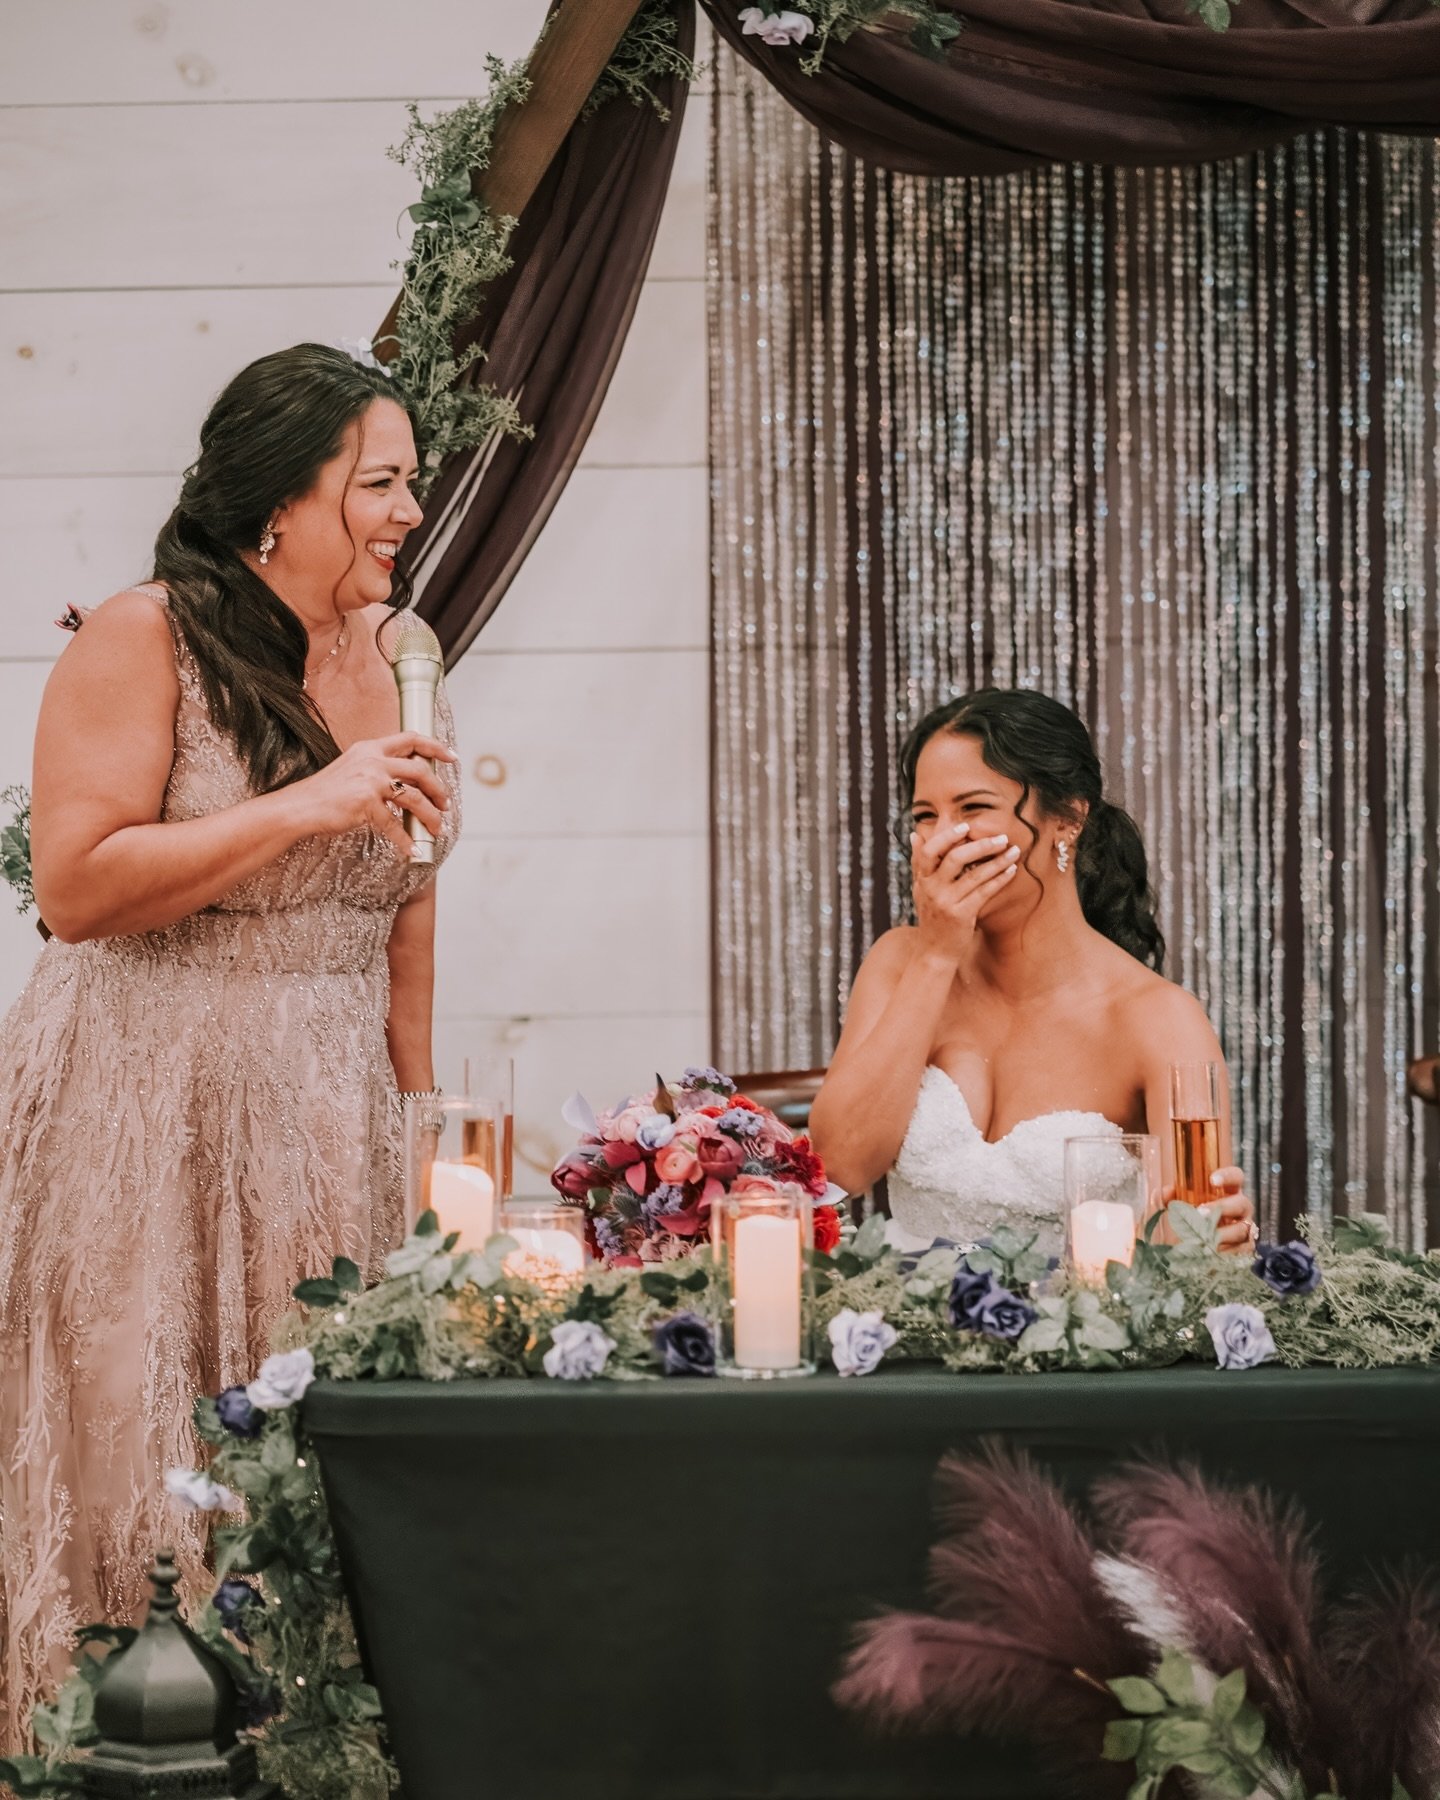 Capturing the candid laughter and heartfelt speeches that make a styled shoot feel like a real wedding day! Adore these ladies! #daresayweddings #weddingphotography #premierbridefl #904weddings #weddinginspo